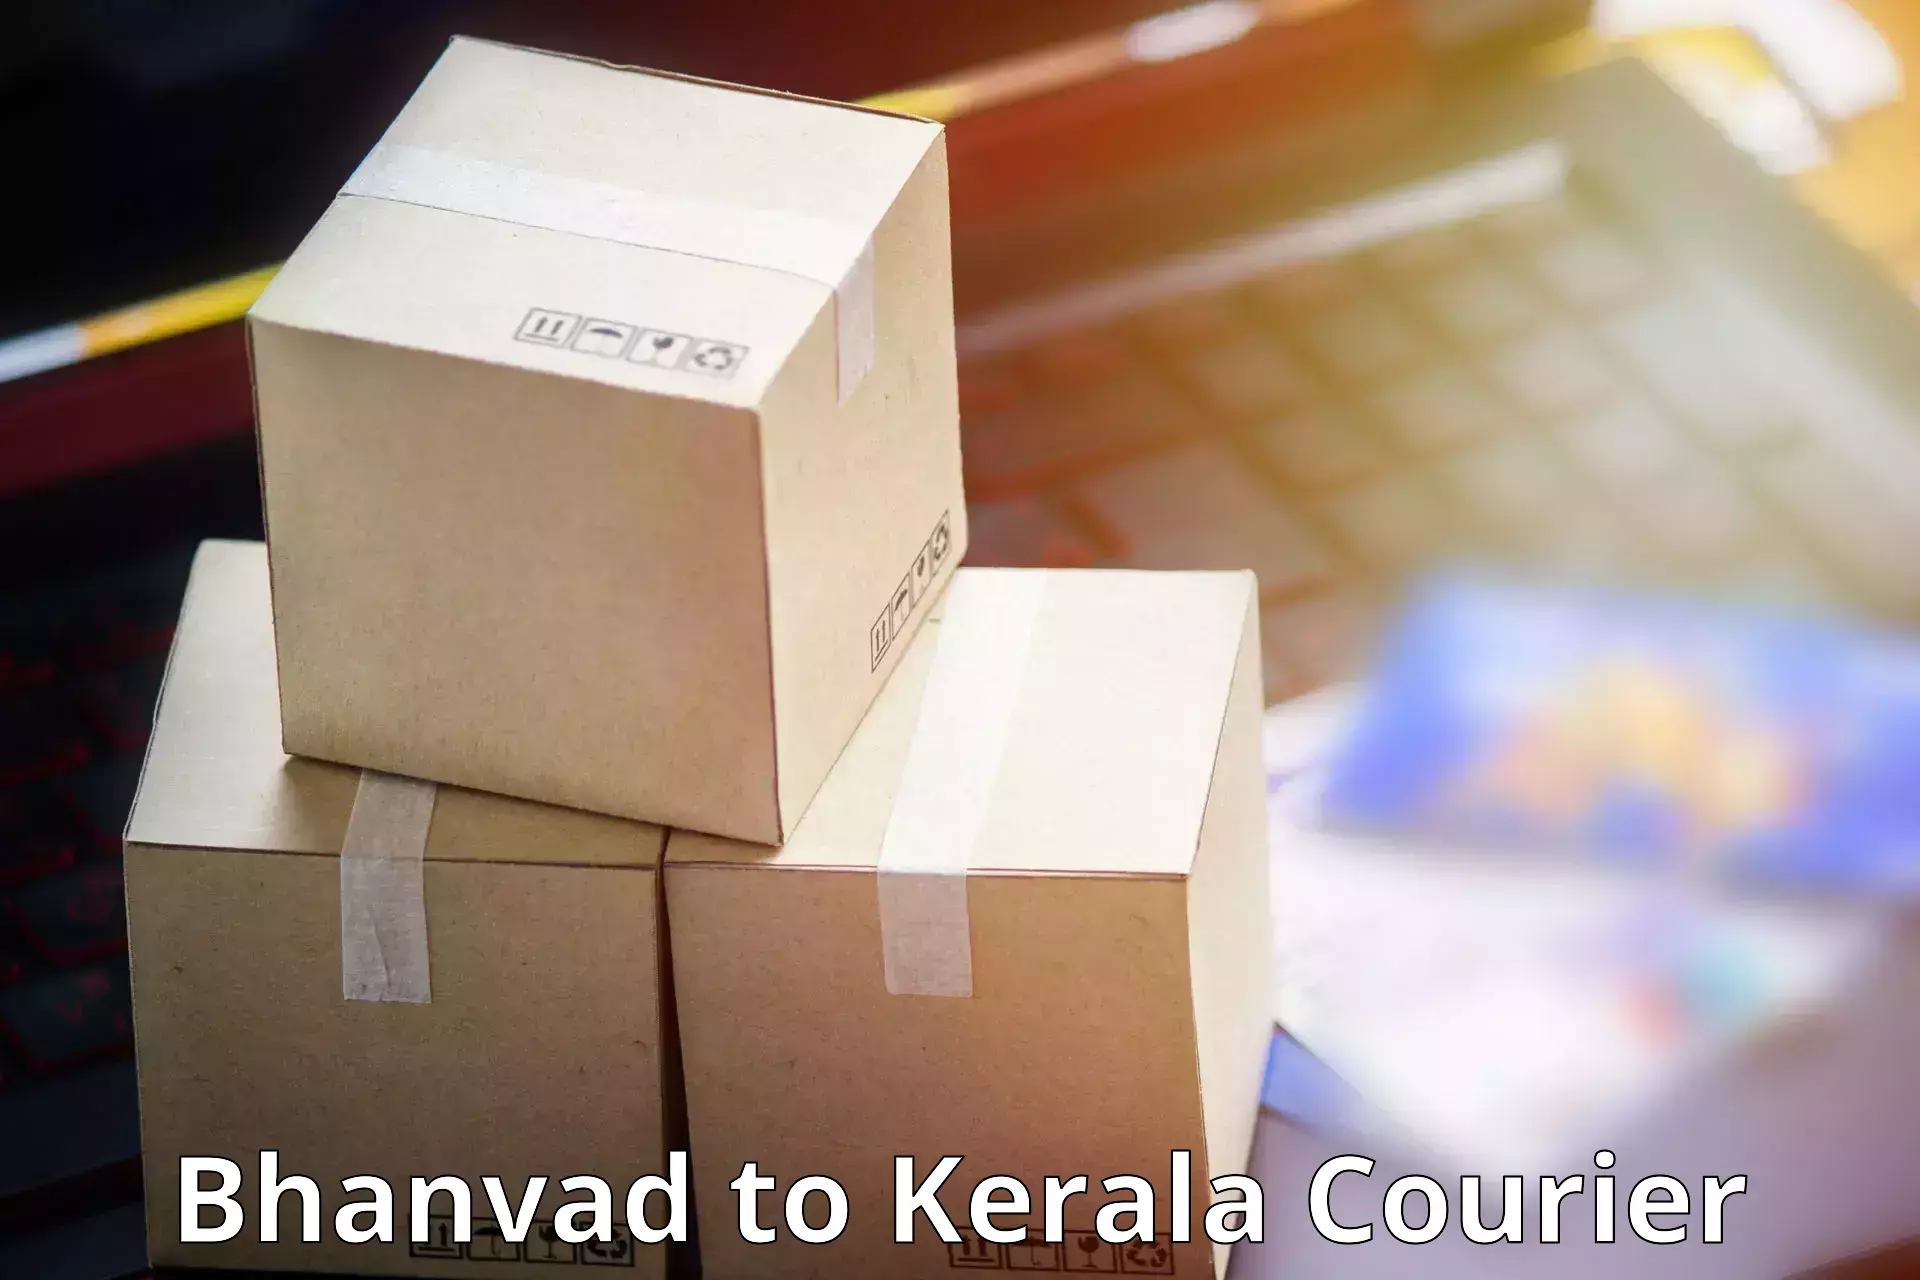 Courier rate comparison Bhanvad to Calicut